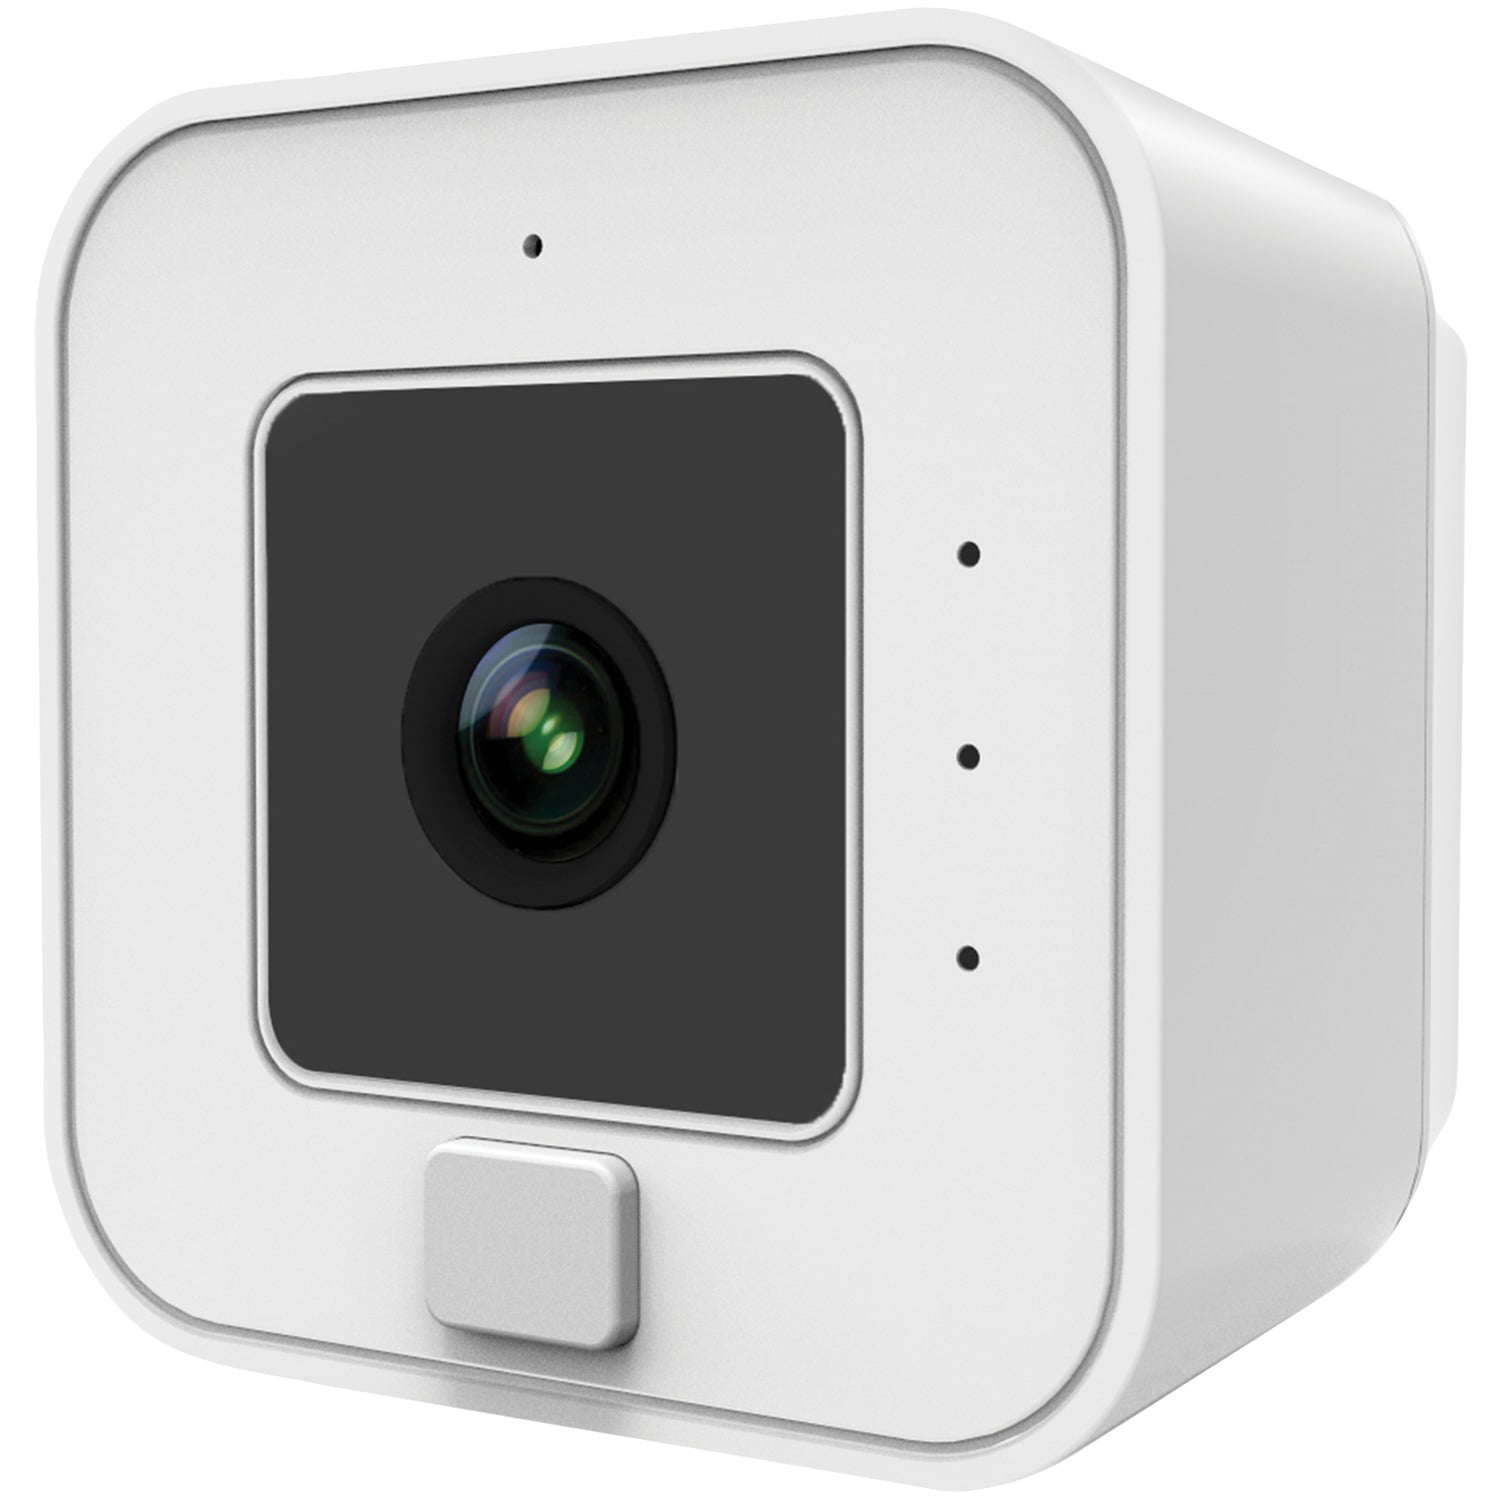 The Cube Wireless Security Camera by SimplySmart Home